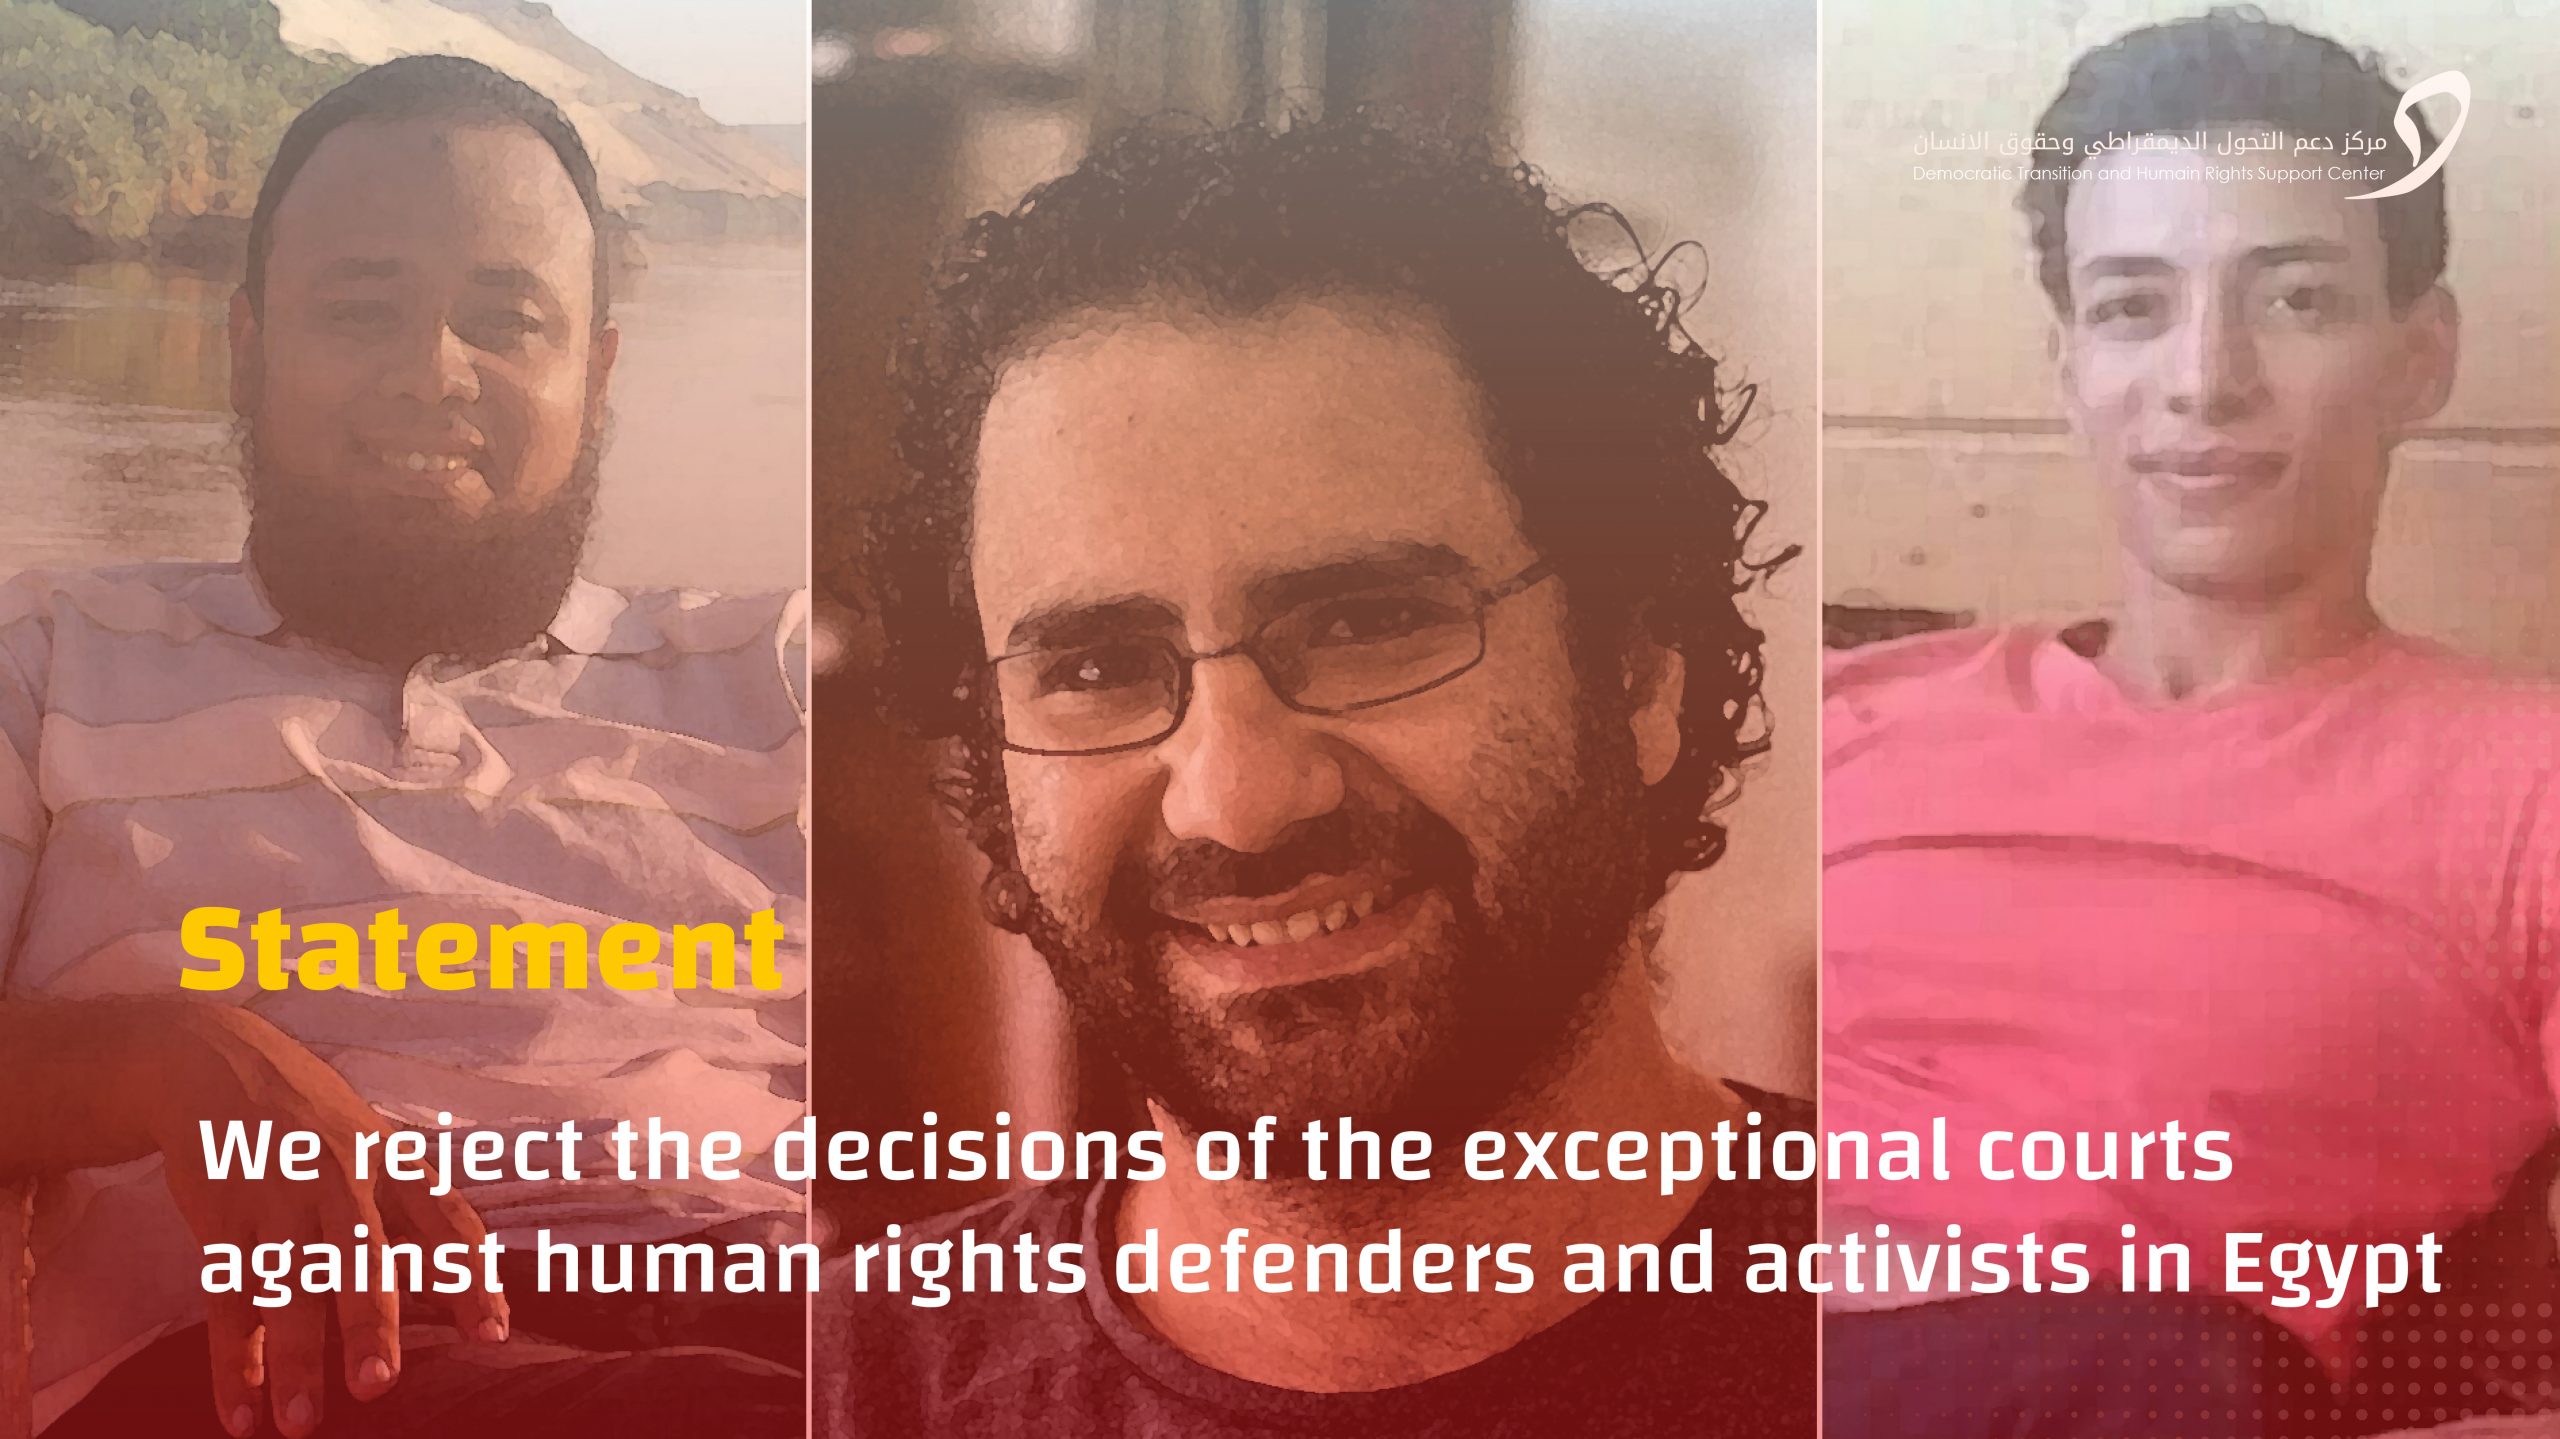 We reject the decisions of the exceptional courts against human rights defenders and activists in Egypt